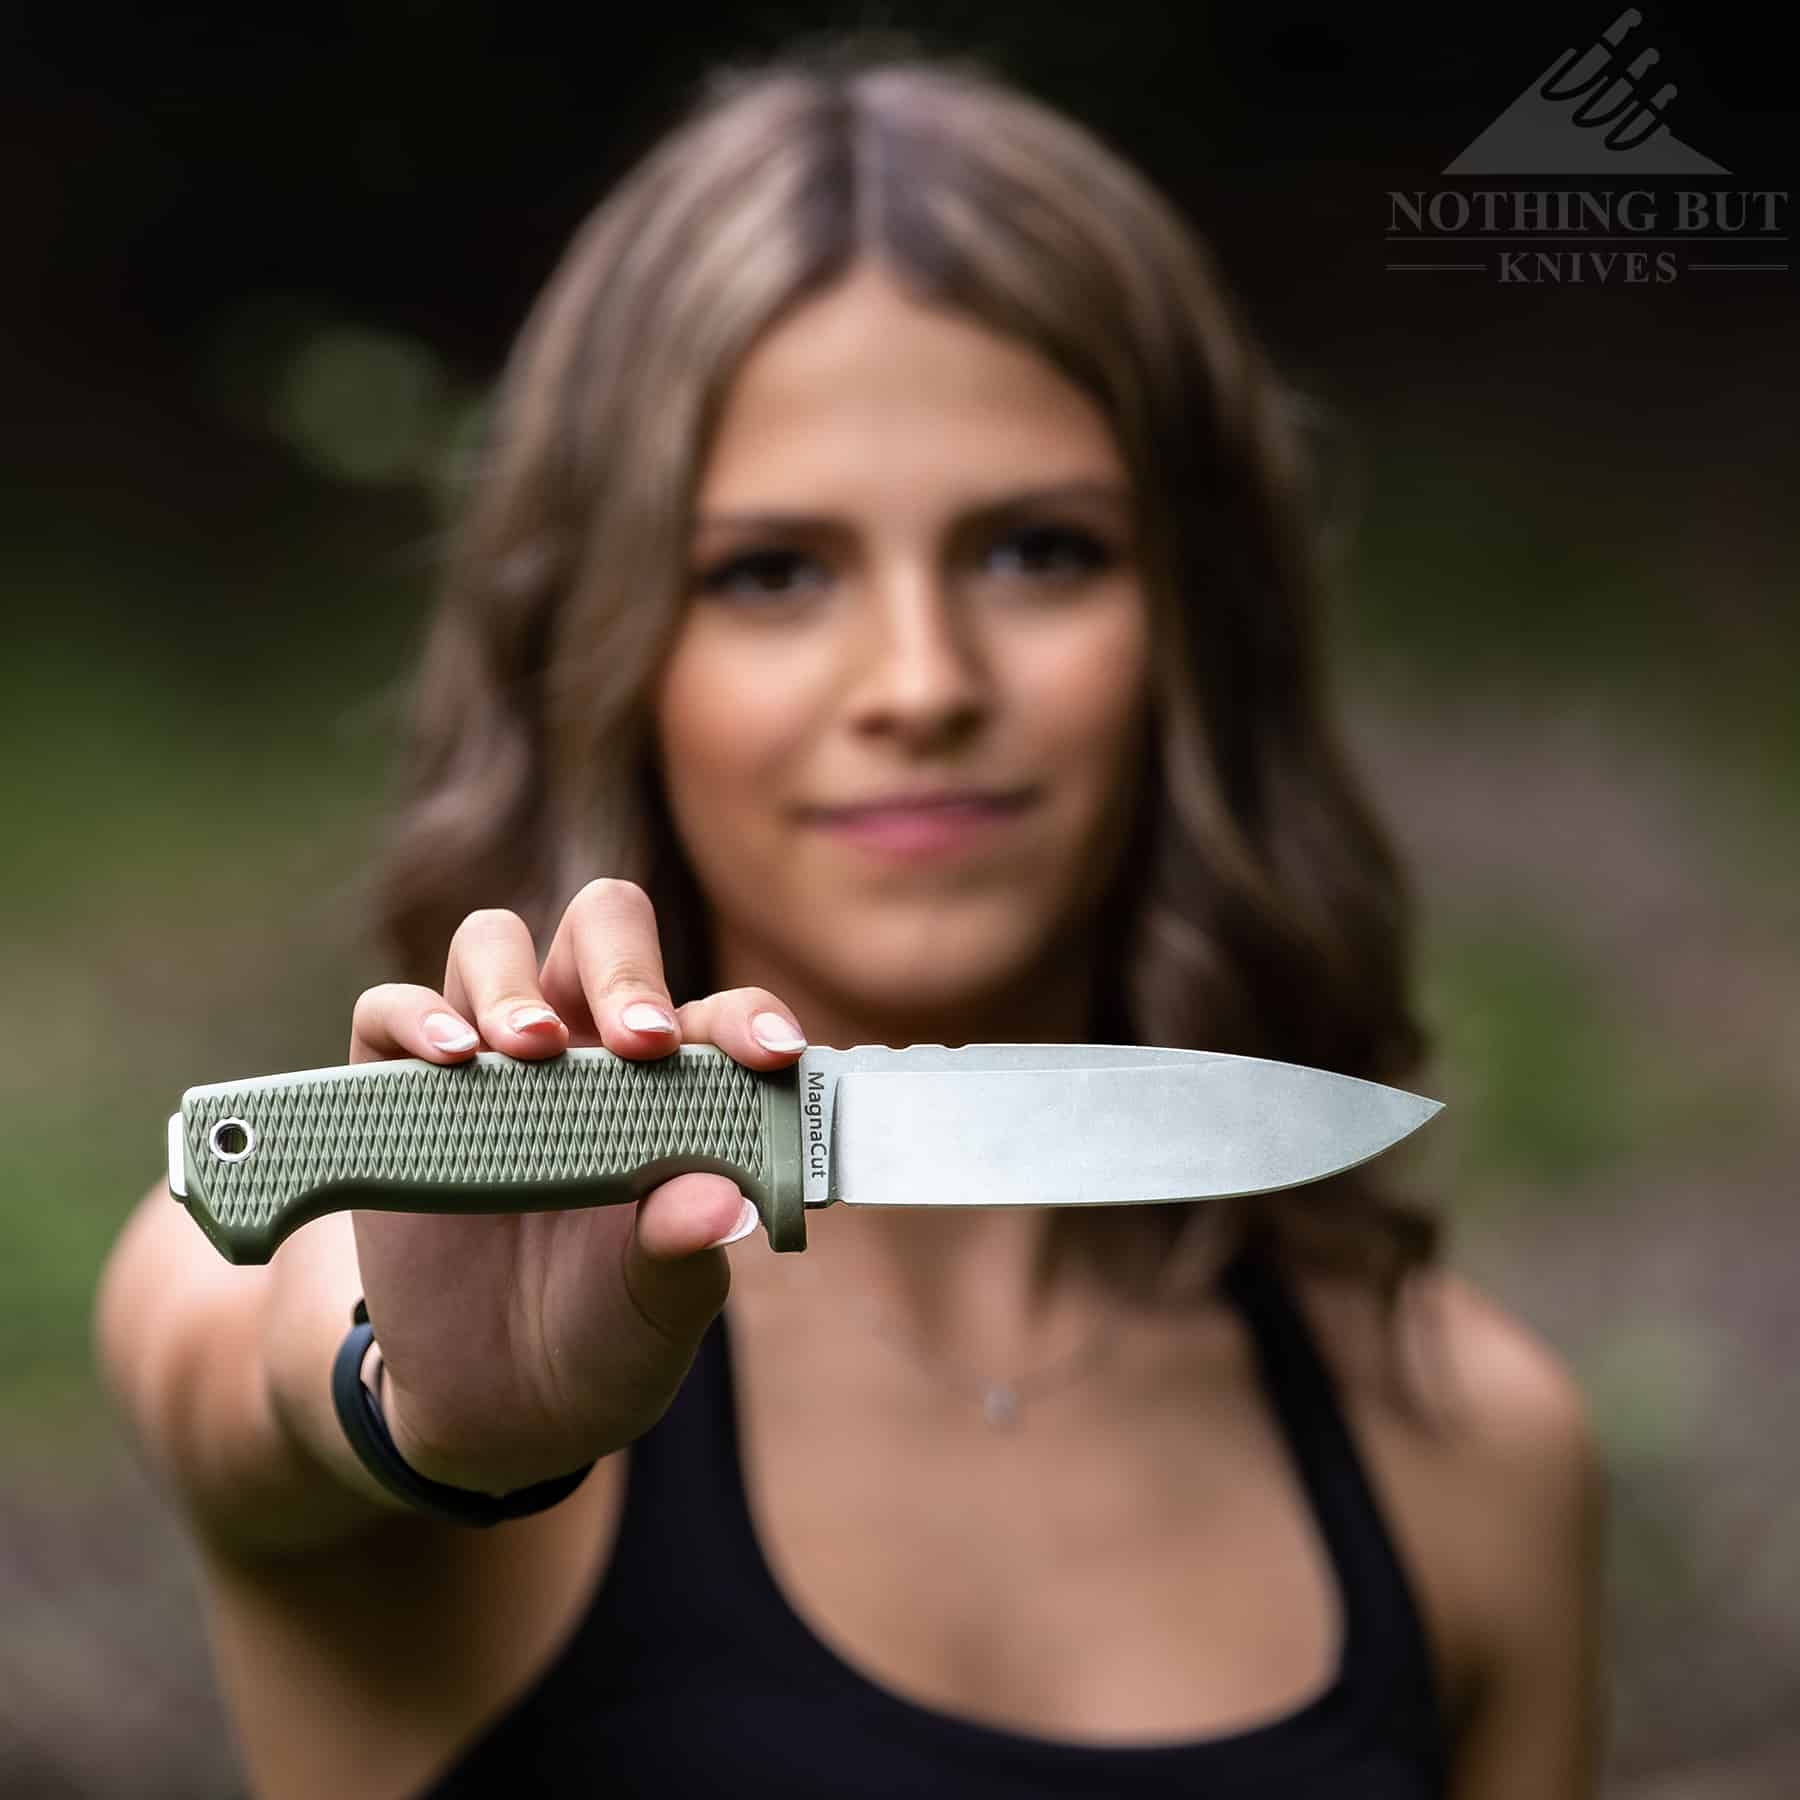 The Demko FreeReign with MagnaCut steel is one of the best survival knives we have tested over the course of the last few years. It has excellent toughness, great handle ergonomics and an excellent break-apart sheath. 